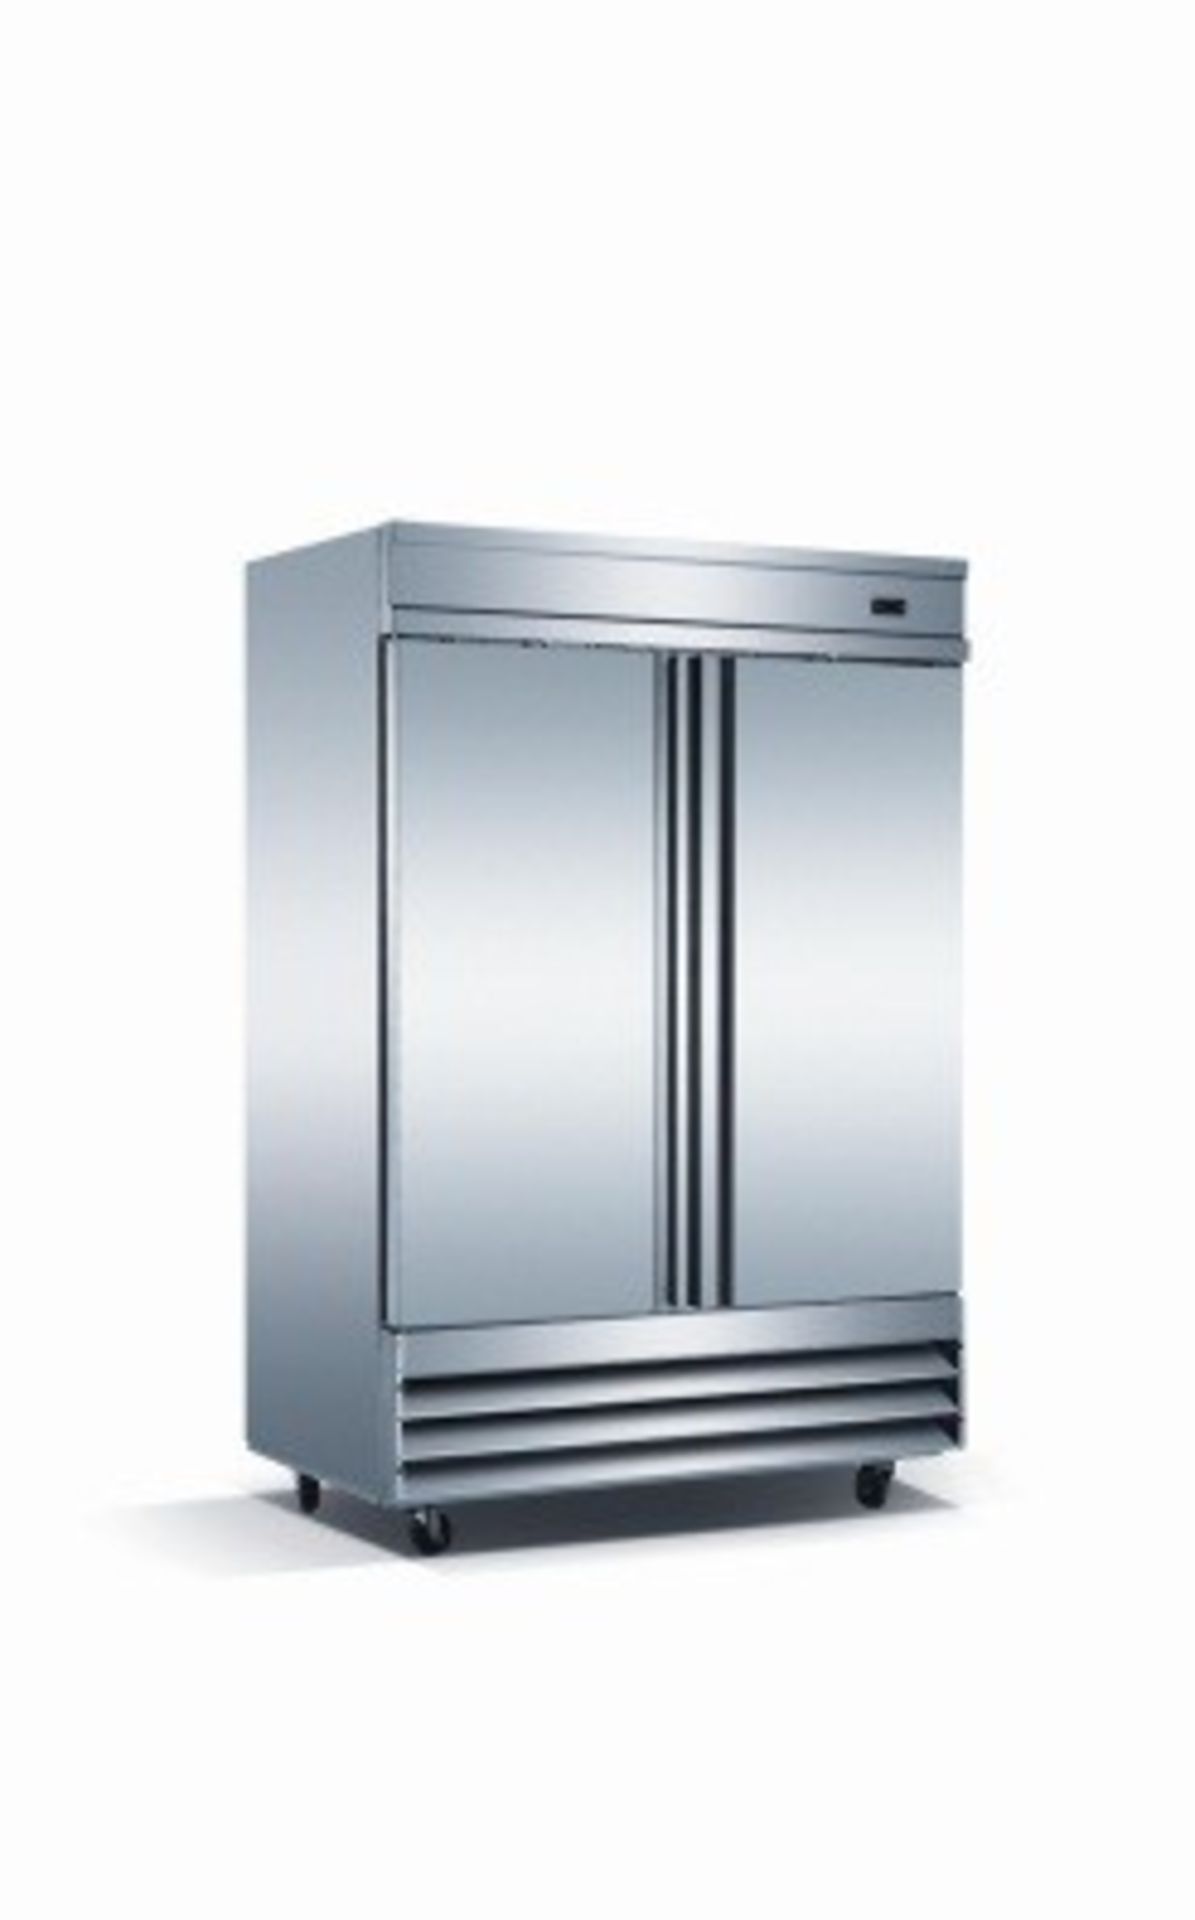 EQ Stainless Steel Reach-In Refrigerator 349 Gal, Silver Model #:CFD-2RR L*W*H (inch):54*32.25*82.5